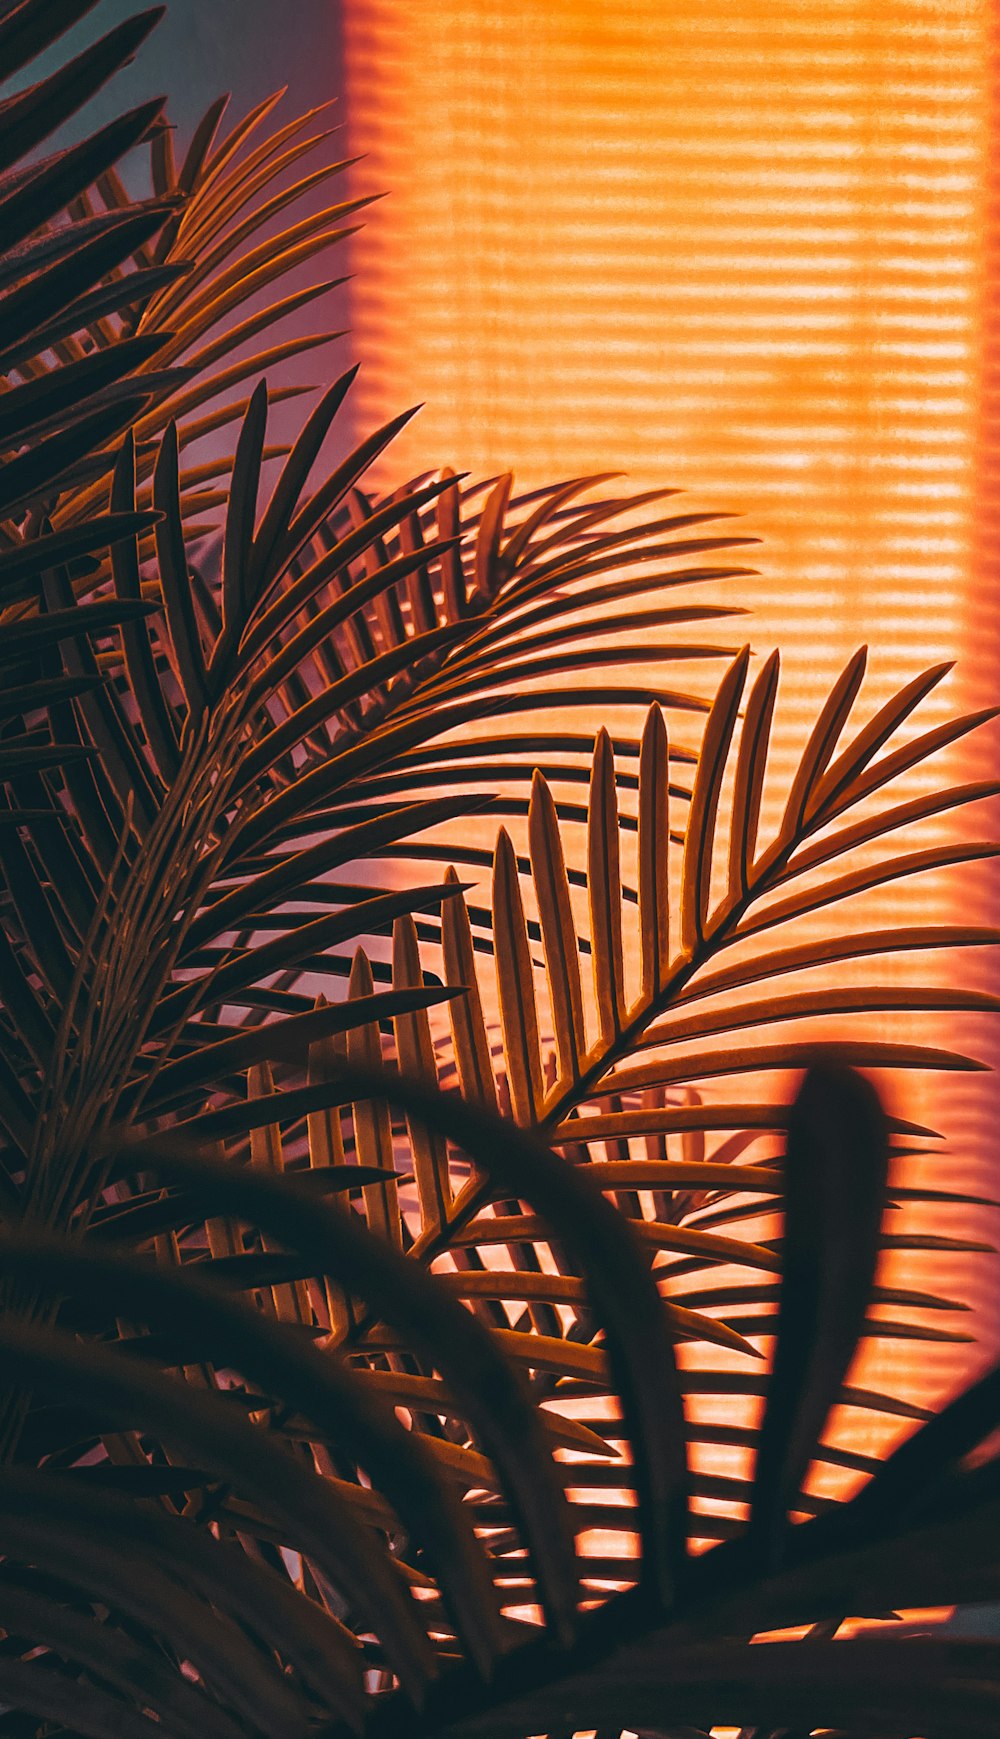 a close up of a palm tree with a window in the background